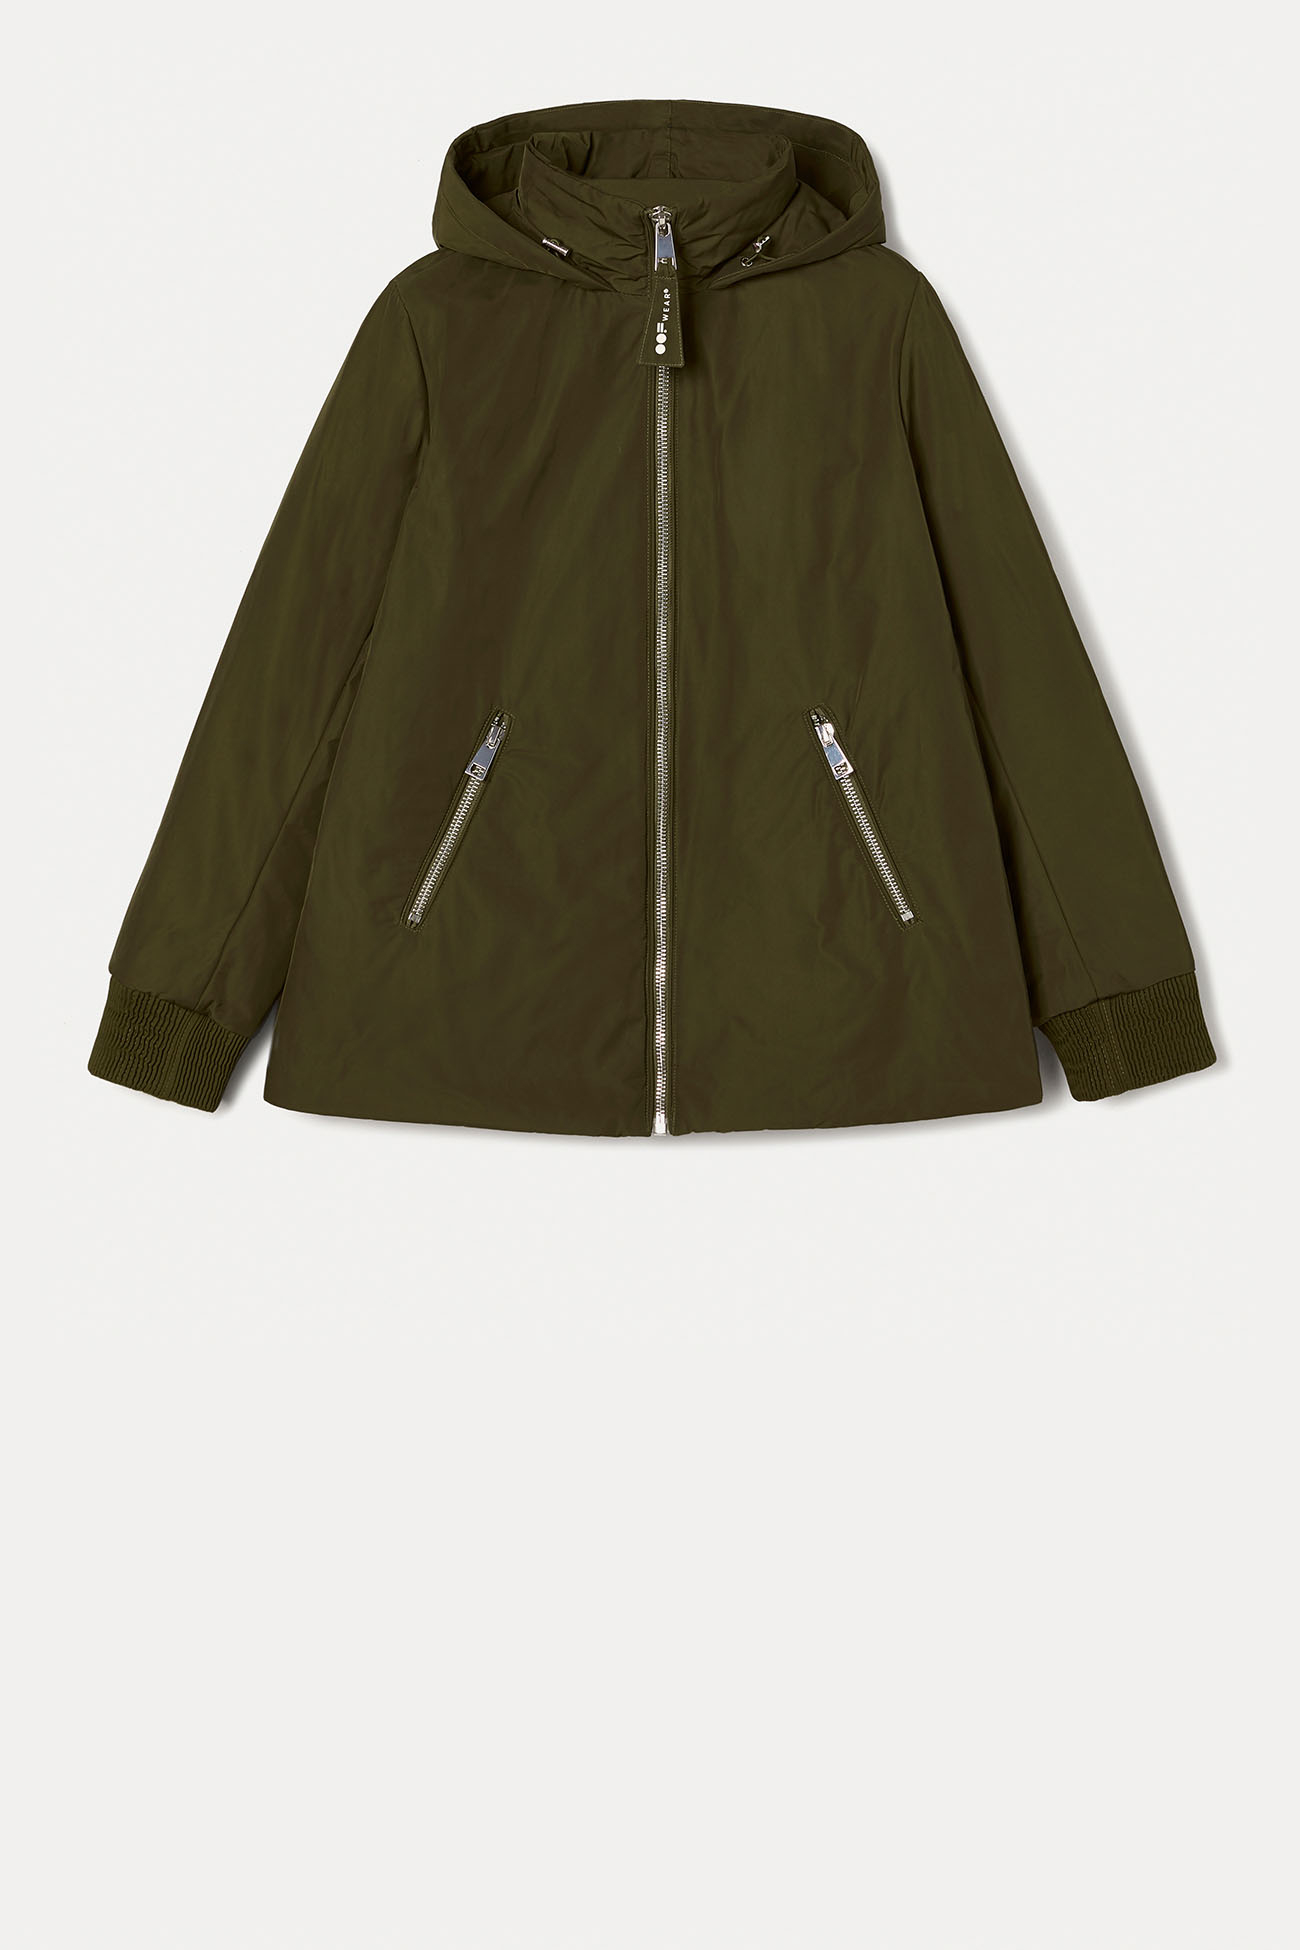 JACKET 9167 MADE IN NYLON MEMORY - ARMY GREEN - OOF WEAR